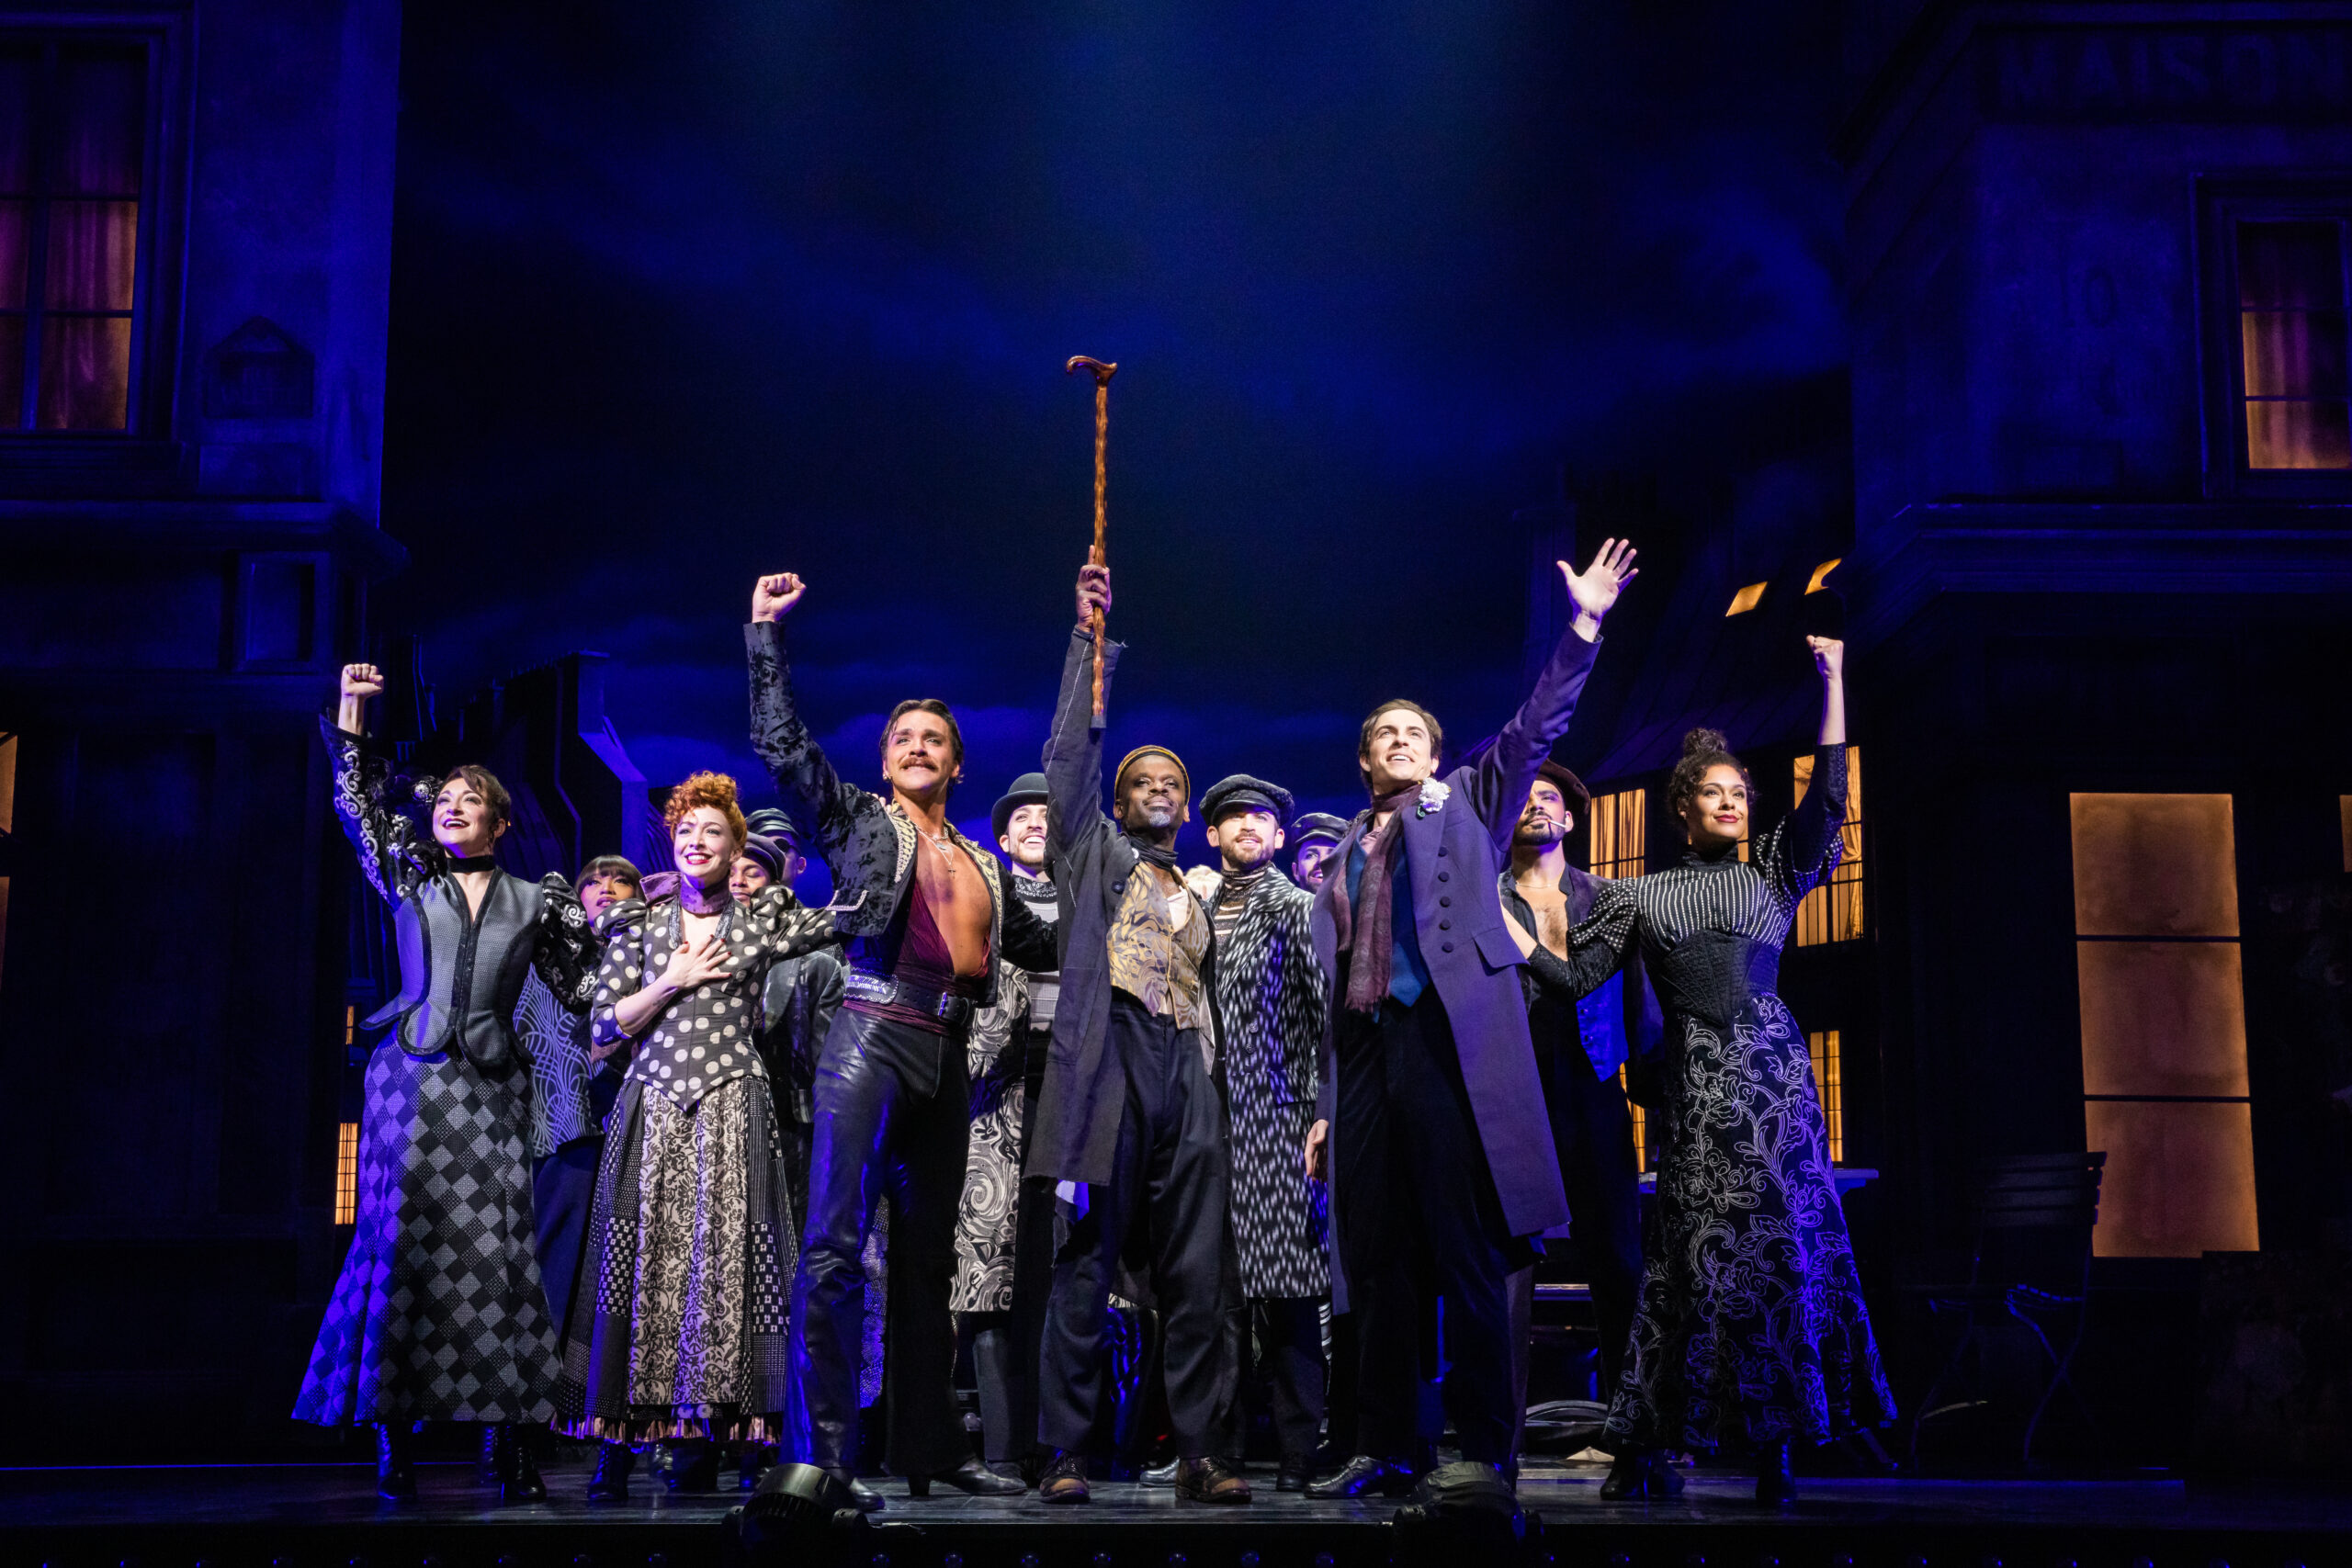 Caleb Marshall-Villarreal, Sahr Ngaujah, Derek Klena and the Cast of Moulin Rouge! The Musical. Photo by Evan Zimmerman for MurphyMade.